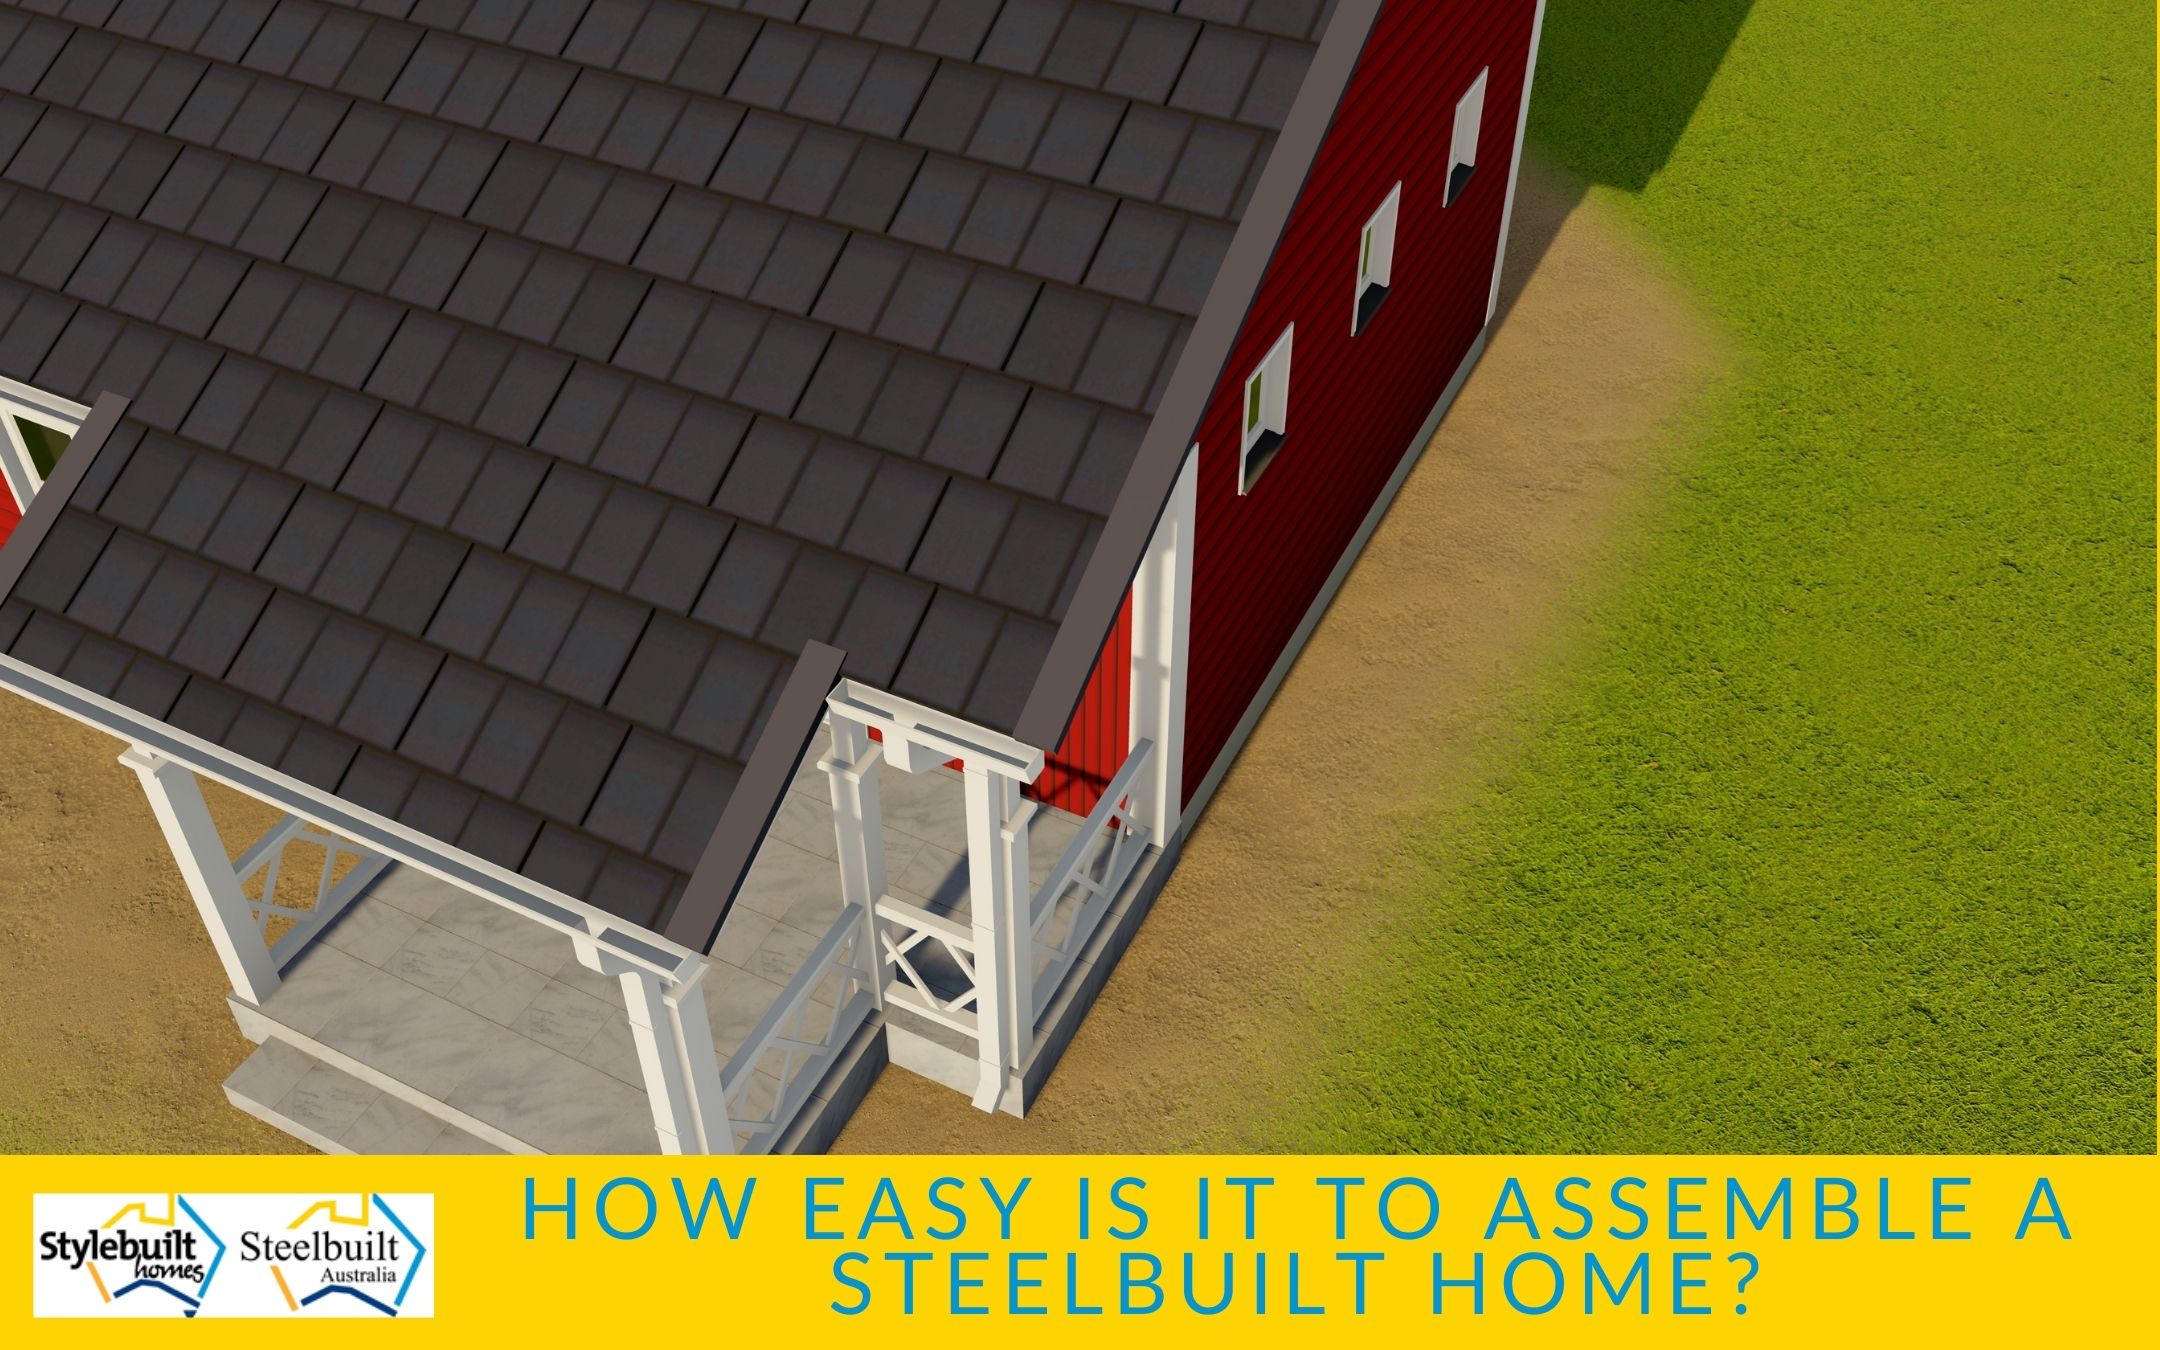 How Easy Is It To Assemble A Steelbuilt Home?